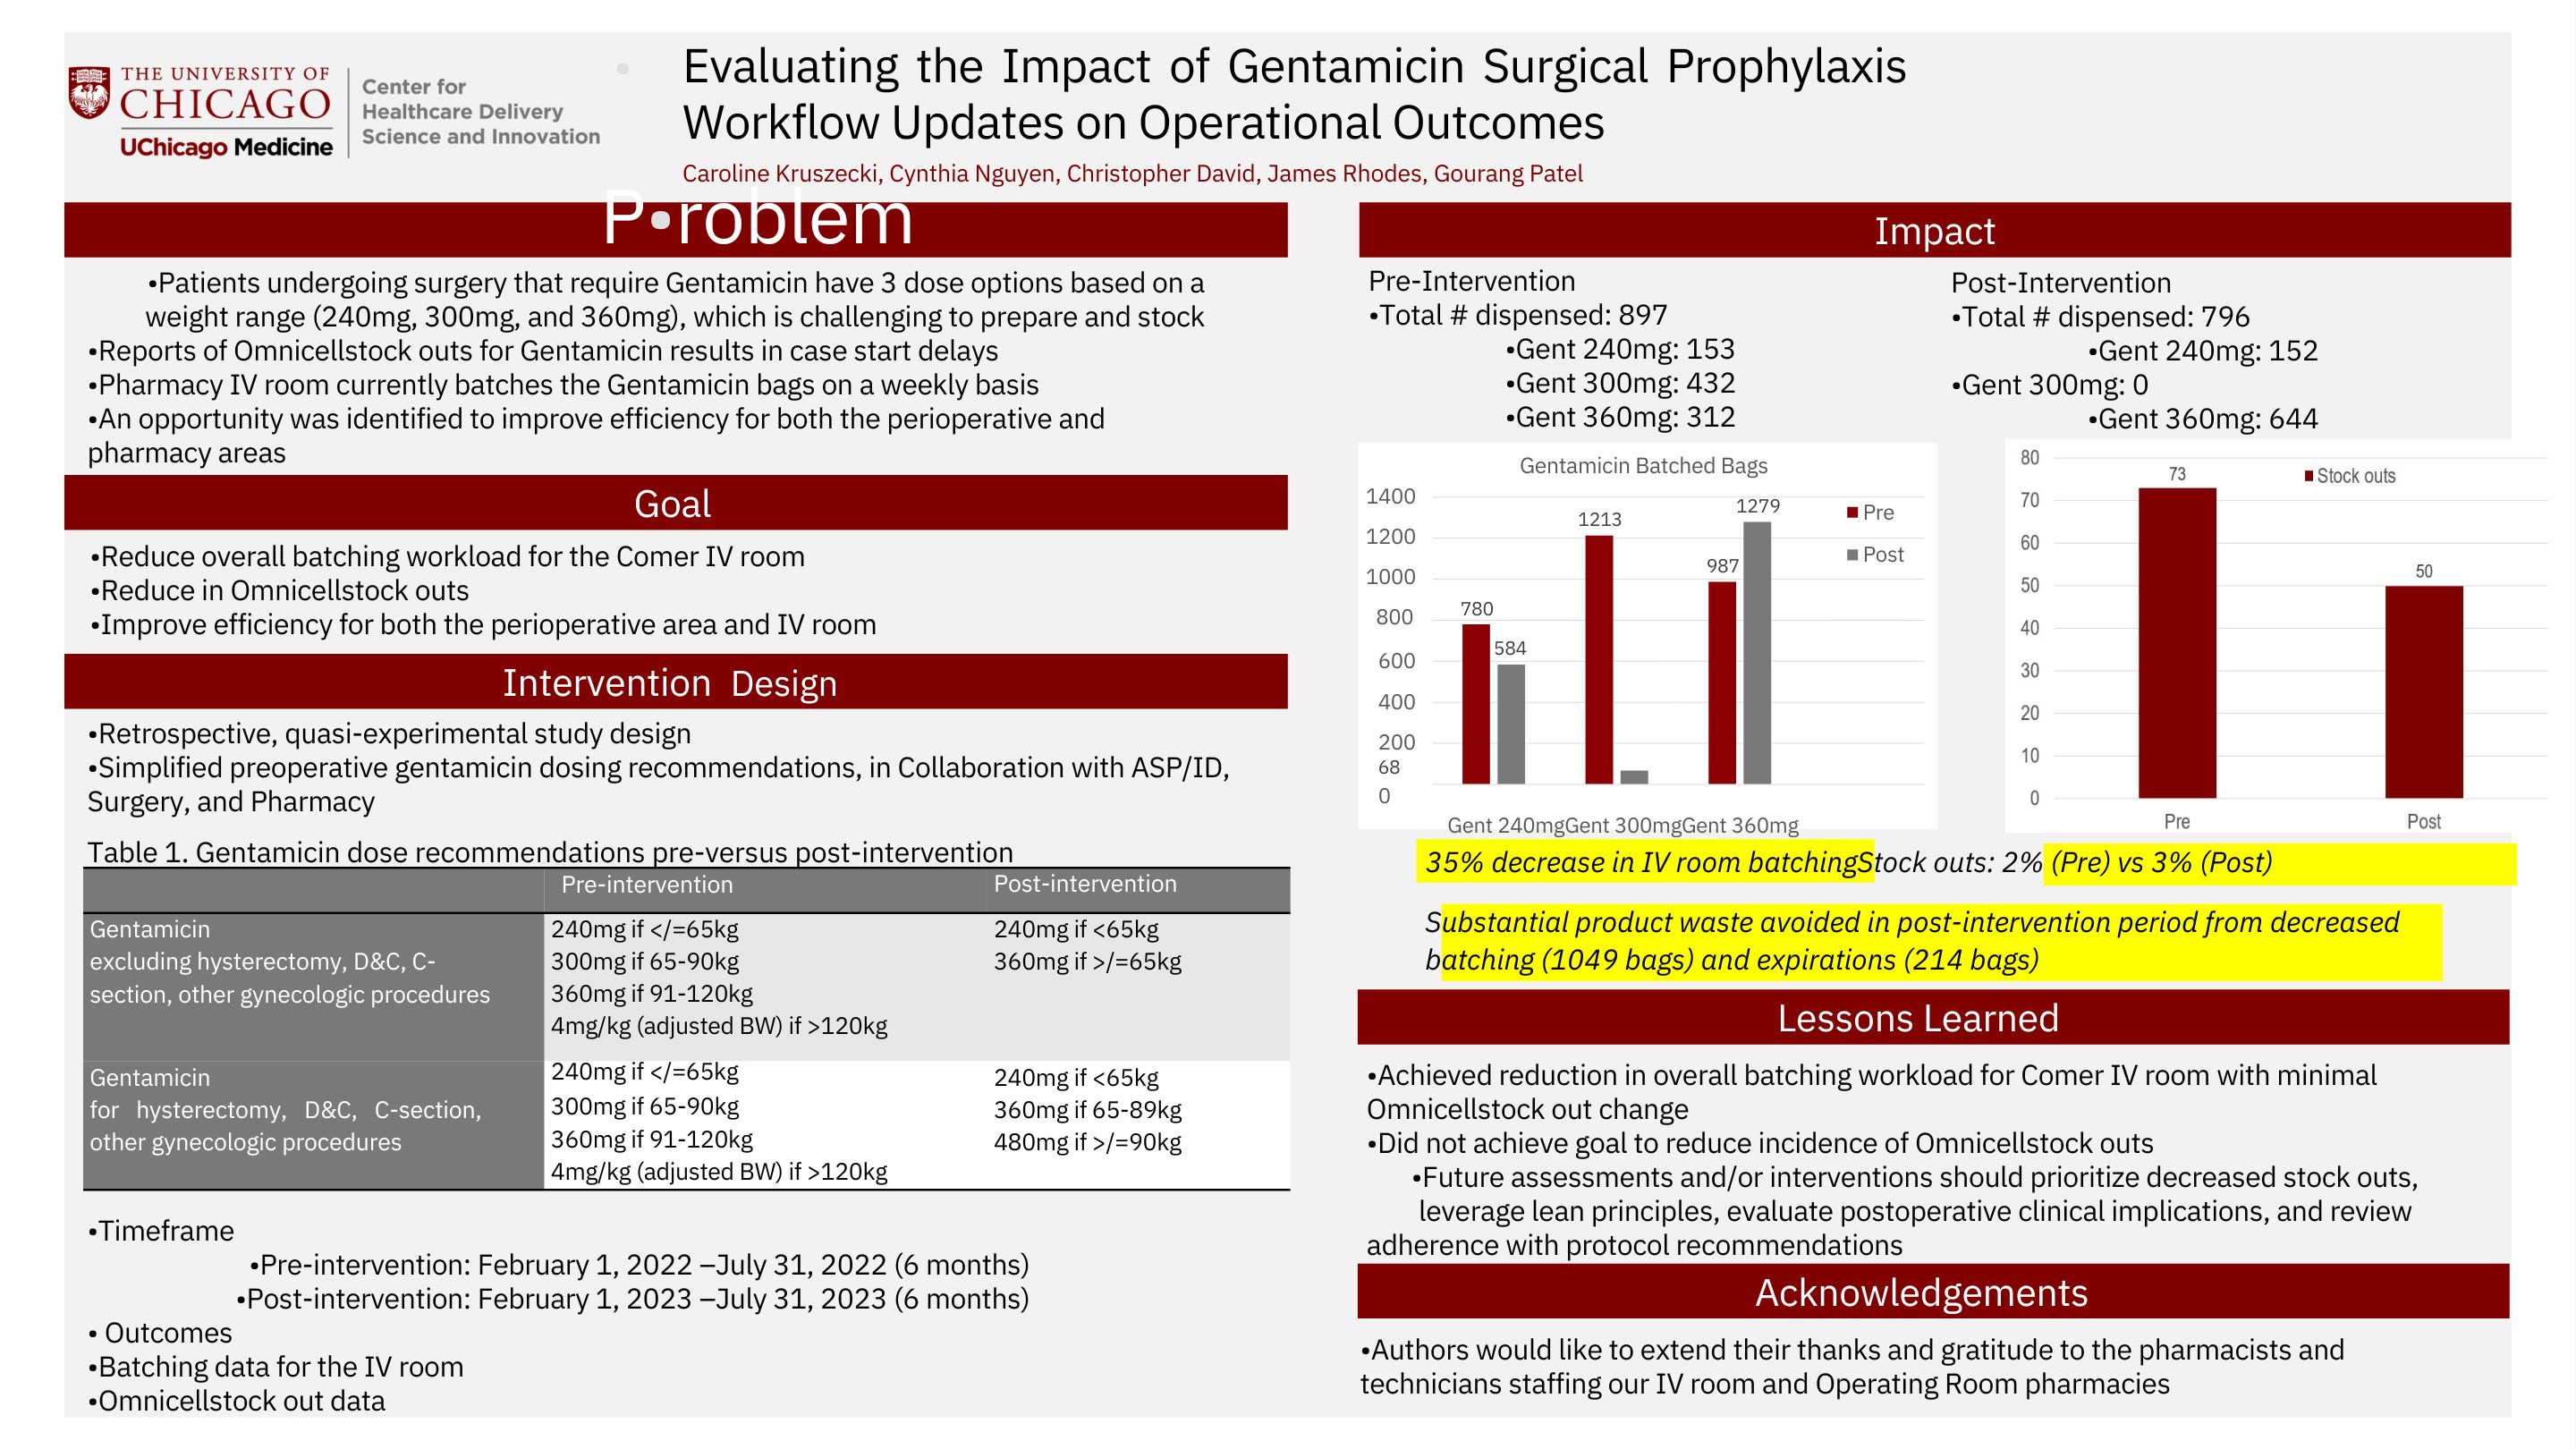 PATEL_Evaluating the Impact of Gentamicin Surgical Prophylaxis Workflow Updates on Operational Outcomes.pdf